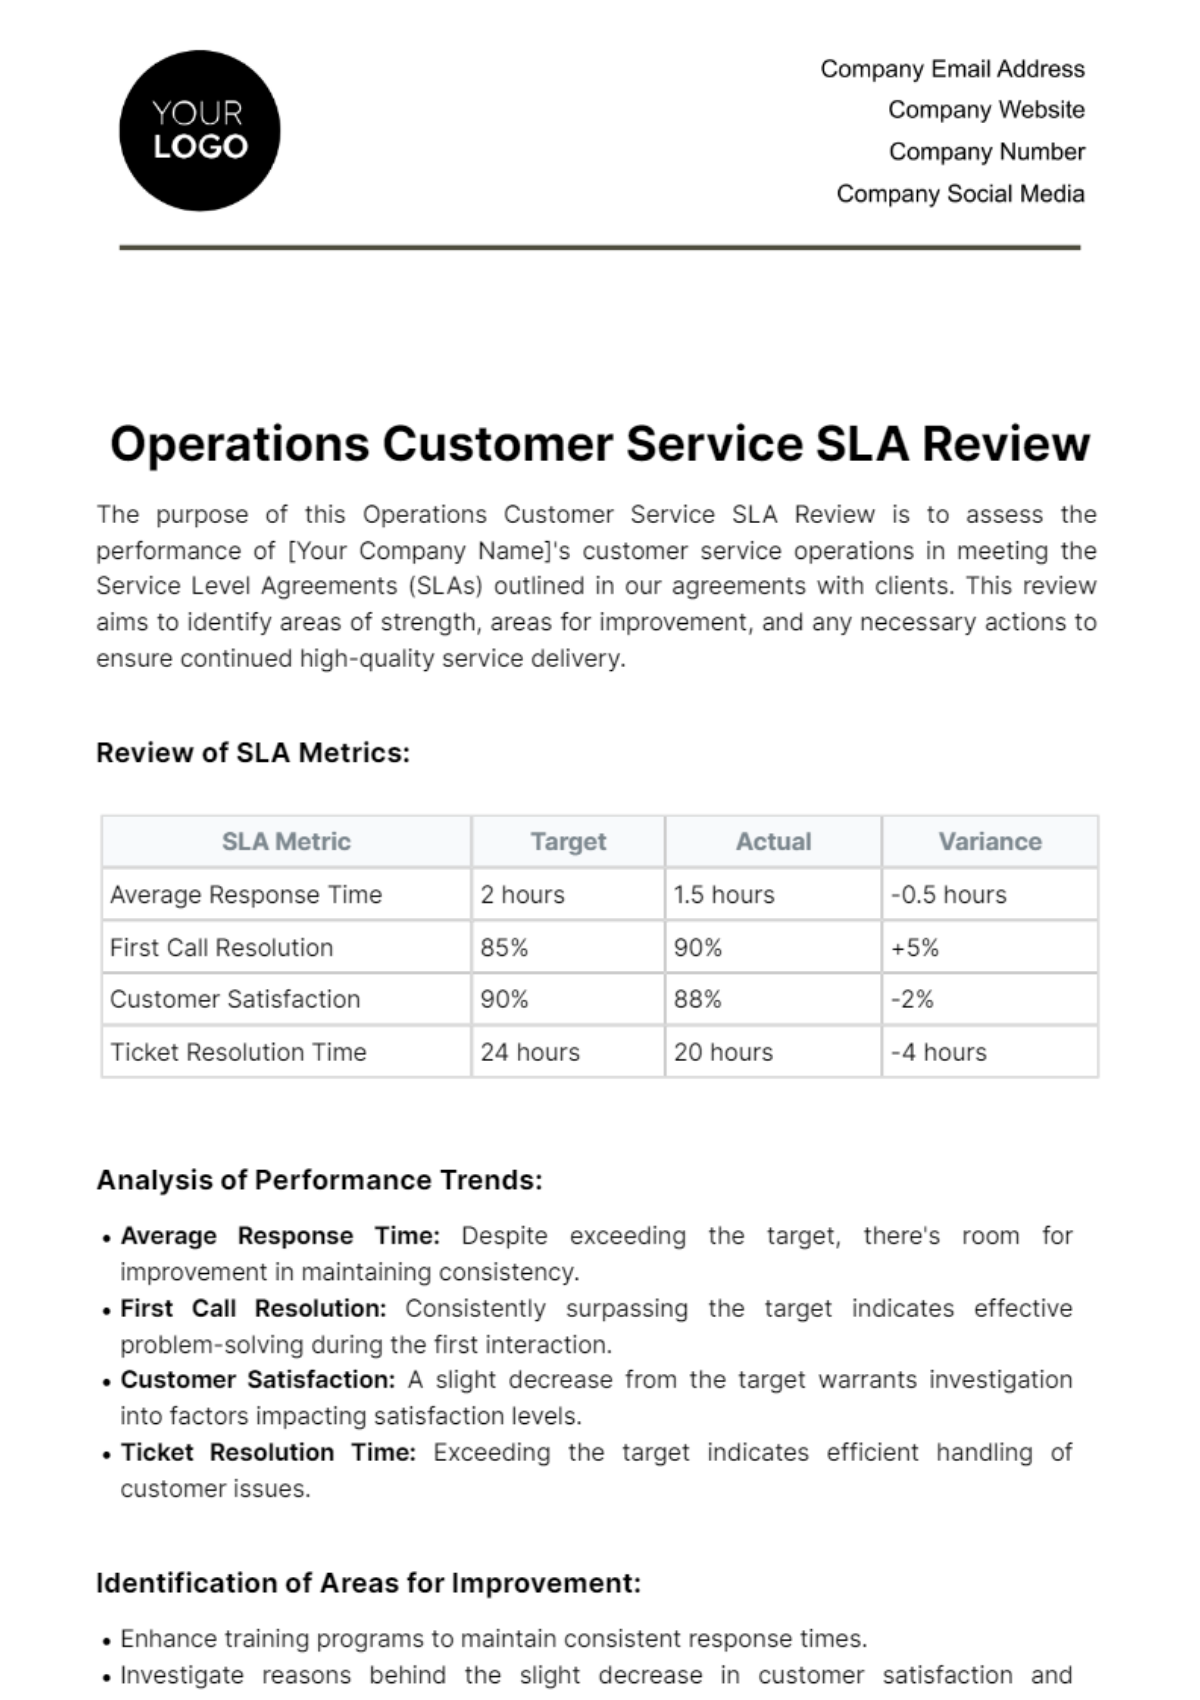 Free Operations Customer Service SLA Review Template